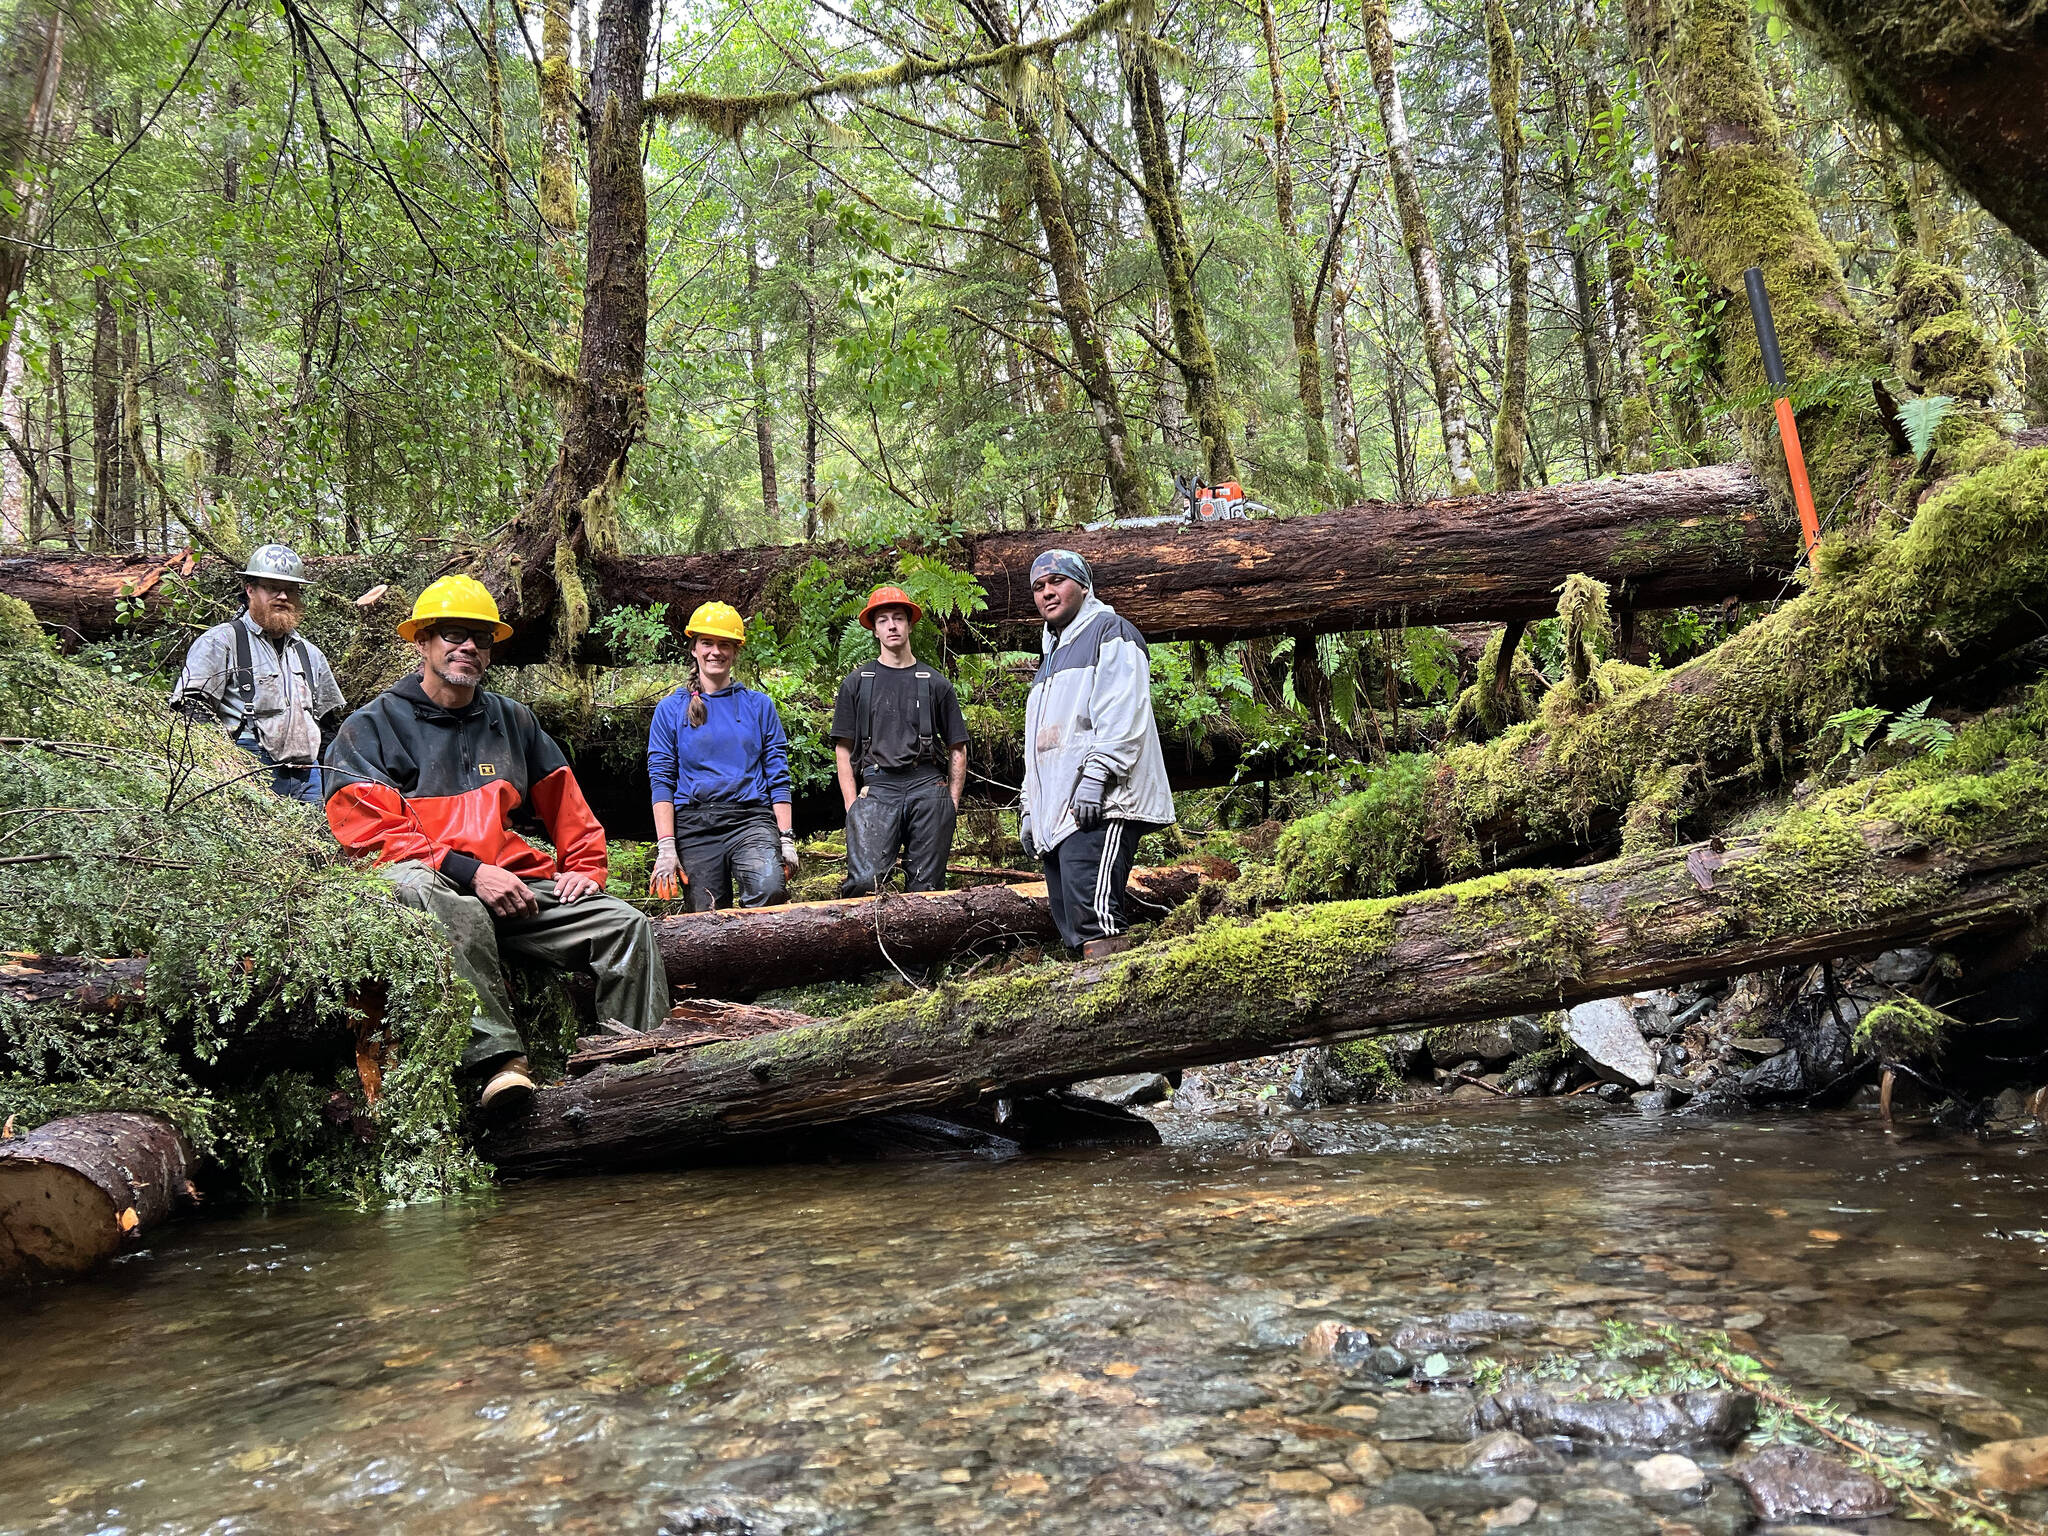 From left to right, Quinn Aboudara of Klawock Indigenous Stewards Forest Partnership, Rick Jackson of Keex’ Kwáan, Kelsey Dean of the Southeast Alaska Watershed Coalition, Cody Ellison of the Klawock partnership, and Kaagwaan Eesh Manuel Rose-Bell of Keex’ Kwáan pose at a recently completed stream structure. For thousands of years, old growth trees and branches fell into what is now Seven Mile Creek. When it was clear-cut logged in 1987, the stream habitat was drastically simplified, to the detriment of wild salmon and other fish. (Courtesy Photos / Mary Catharine Martin)